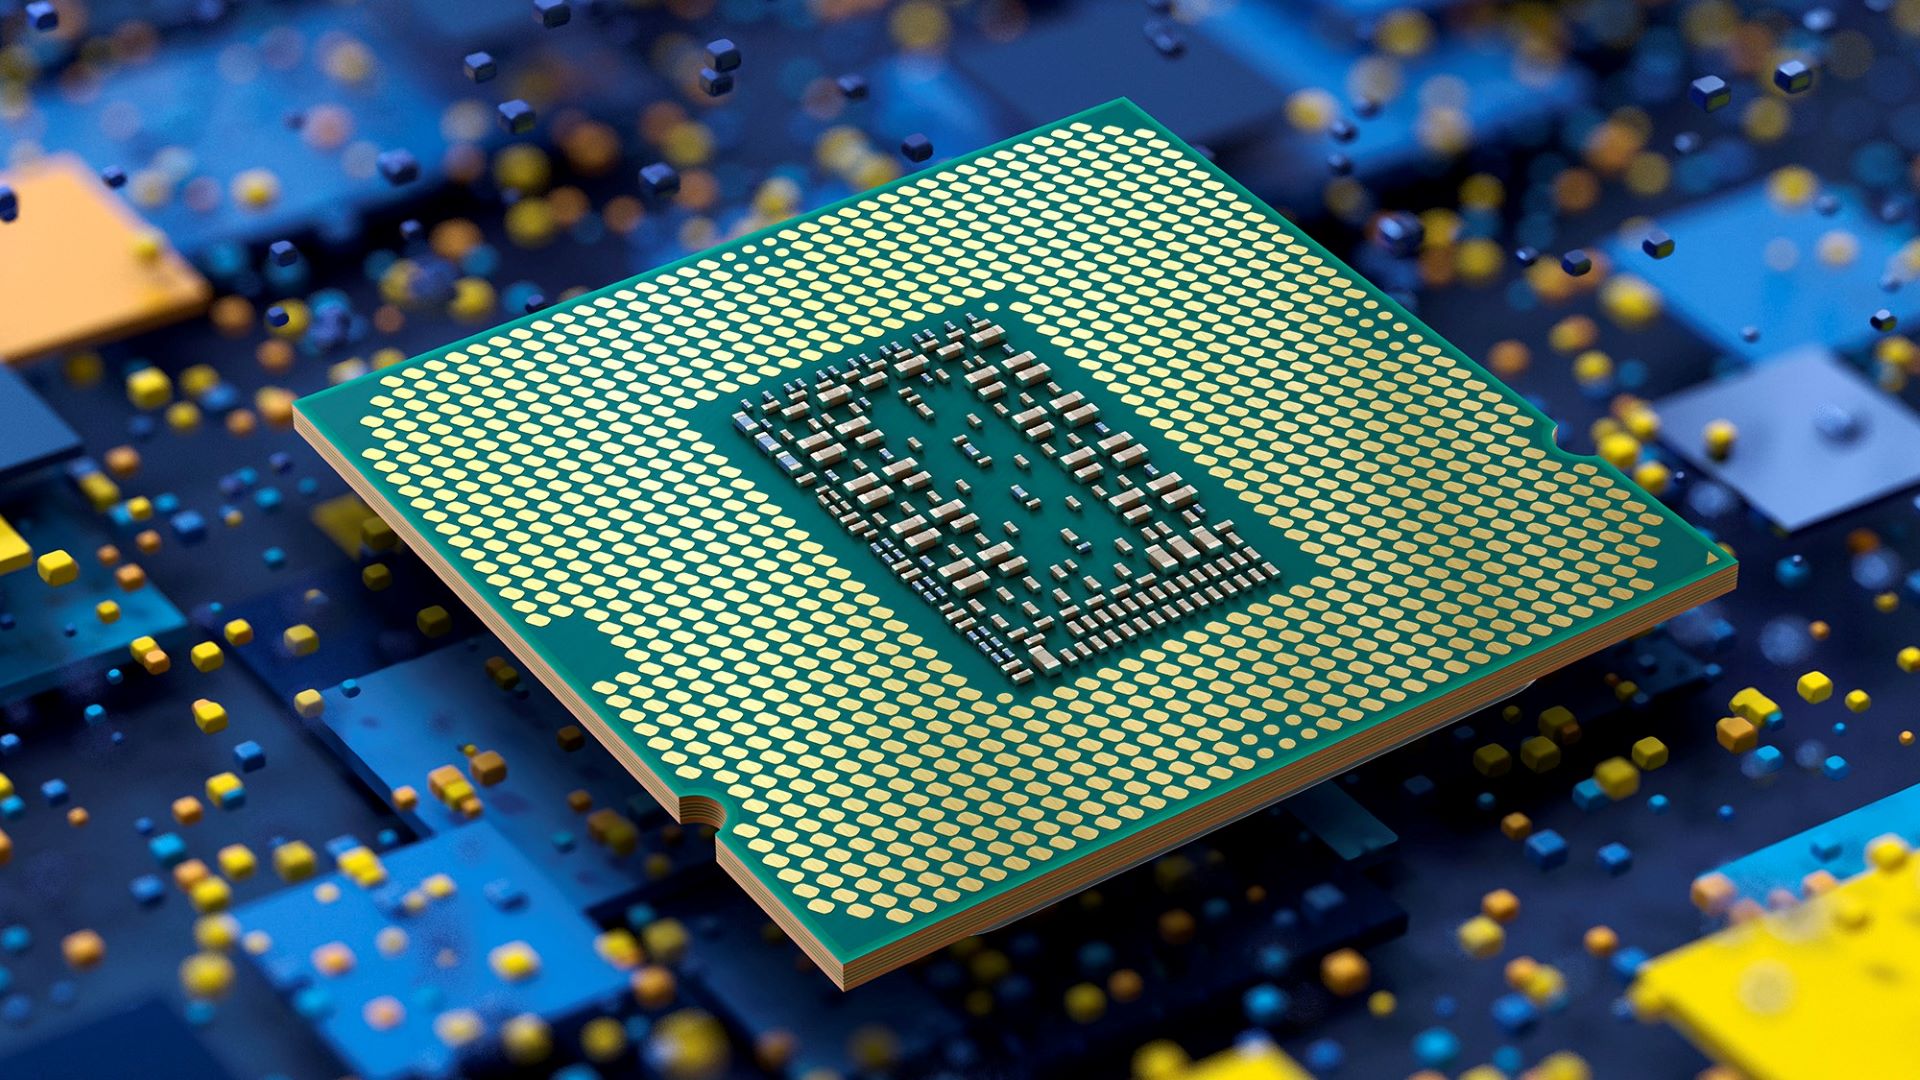 New Intel Alder Lake leak suggests it could cost almost as much as an RTX 3080